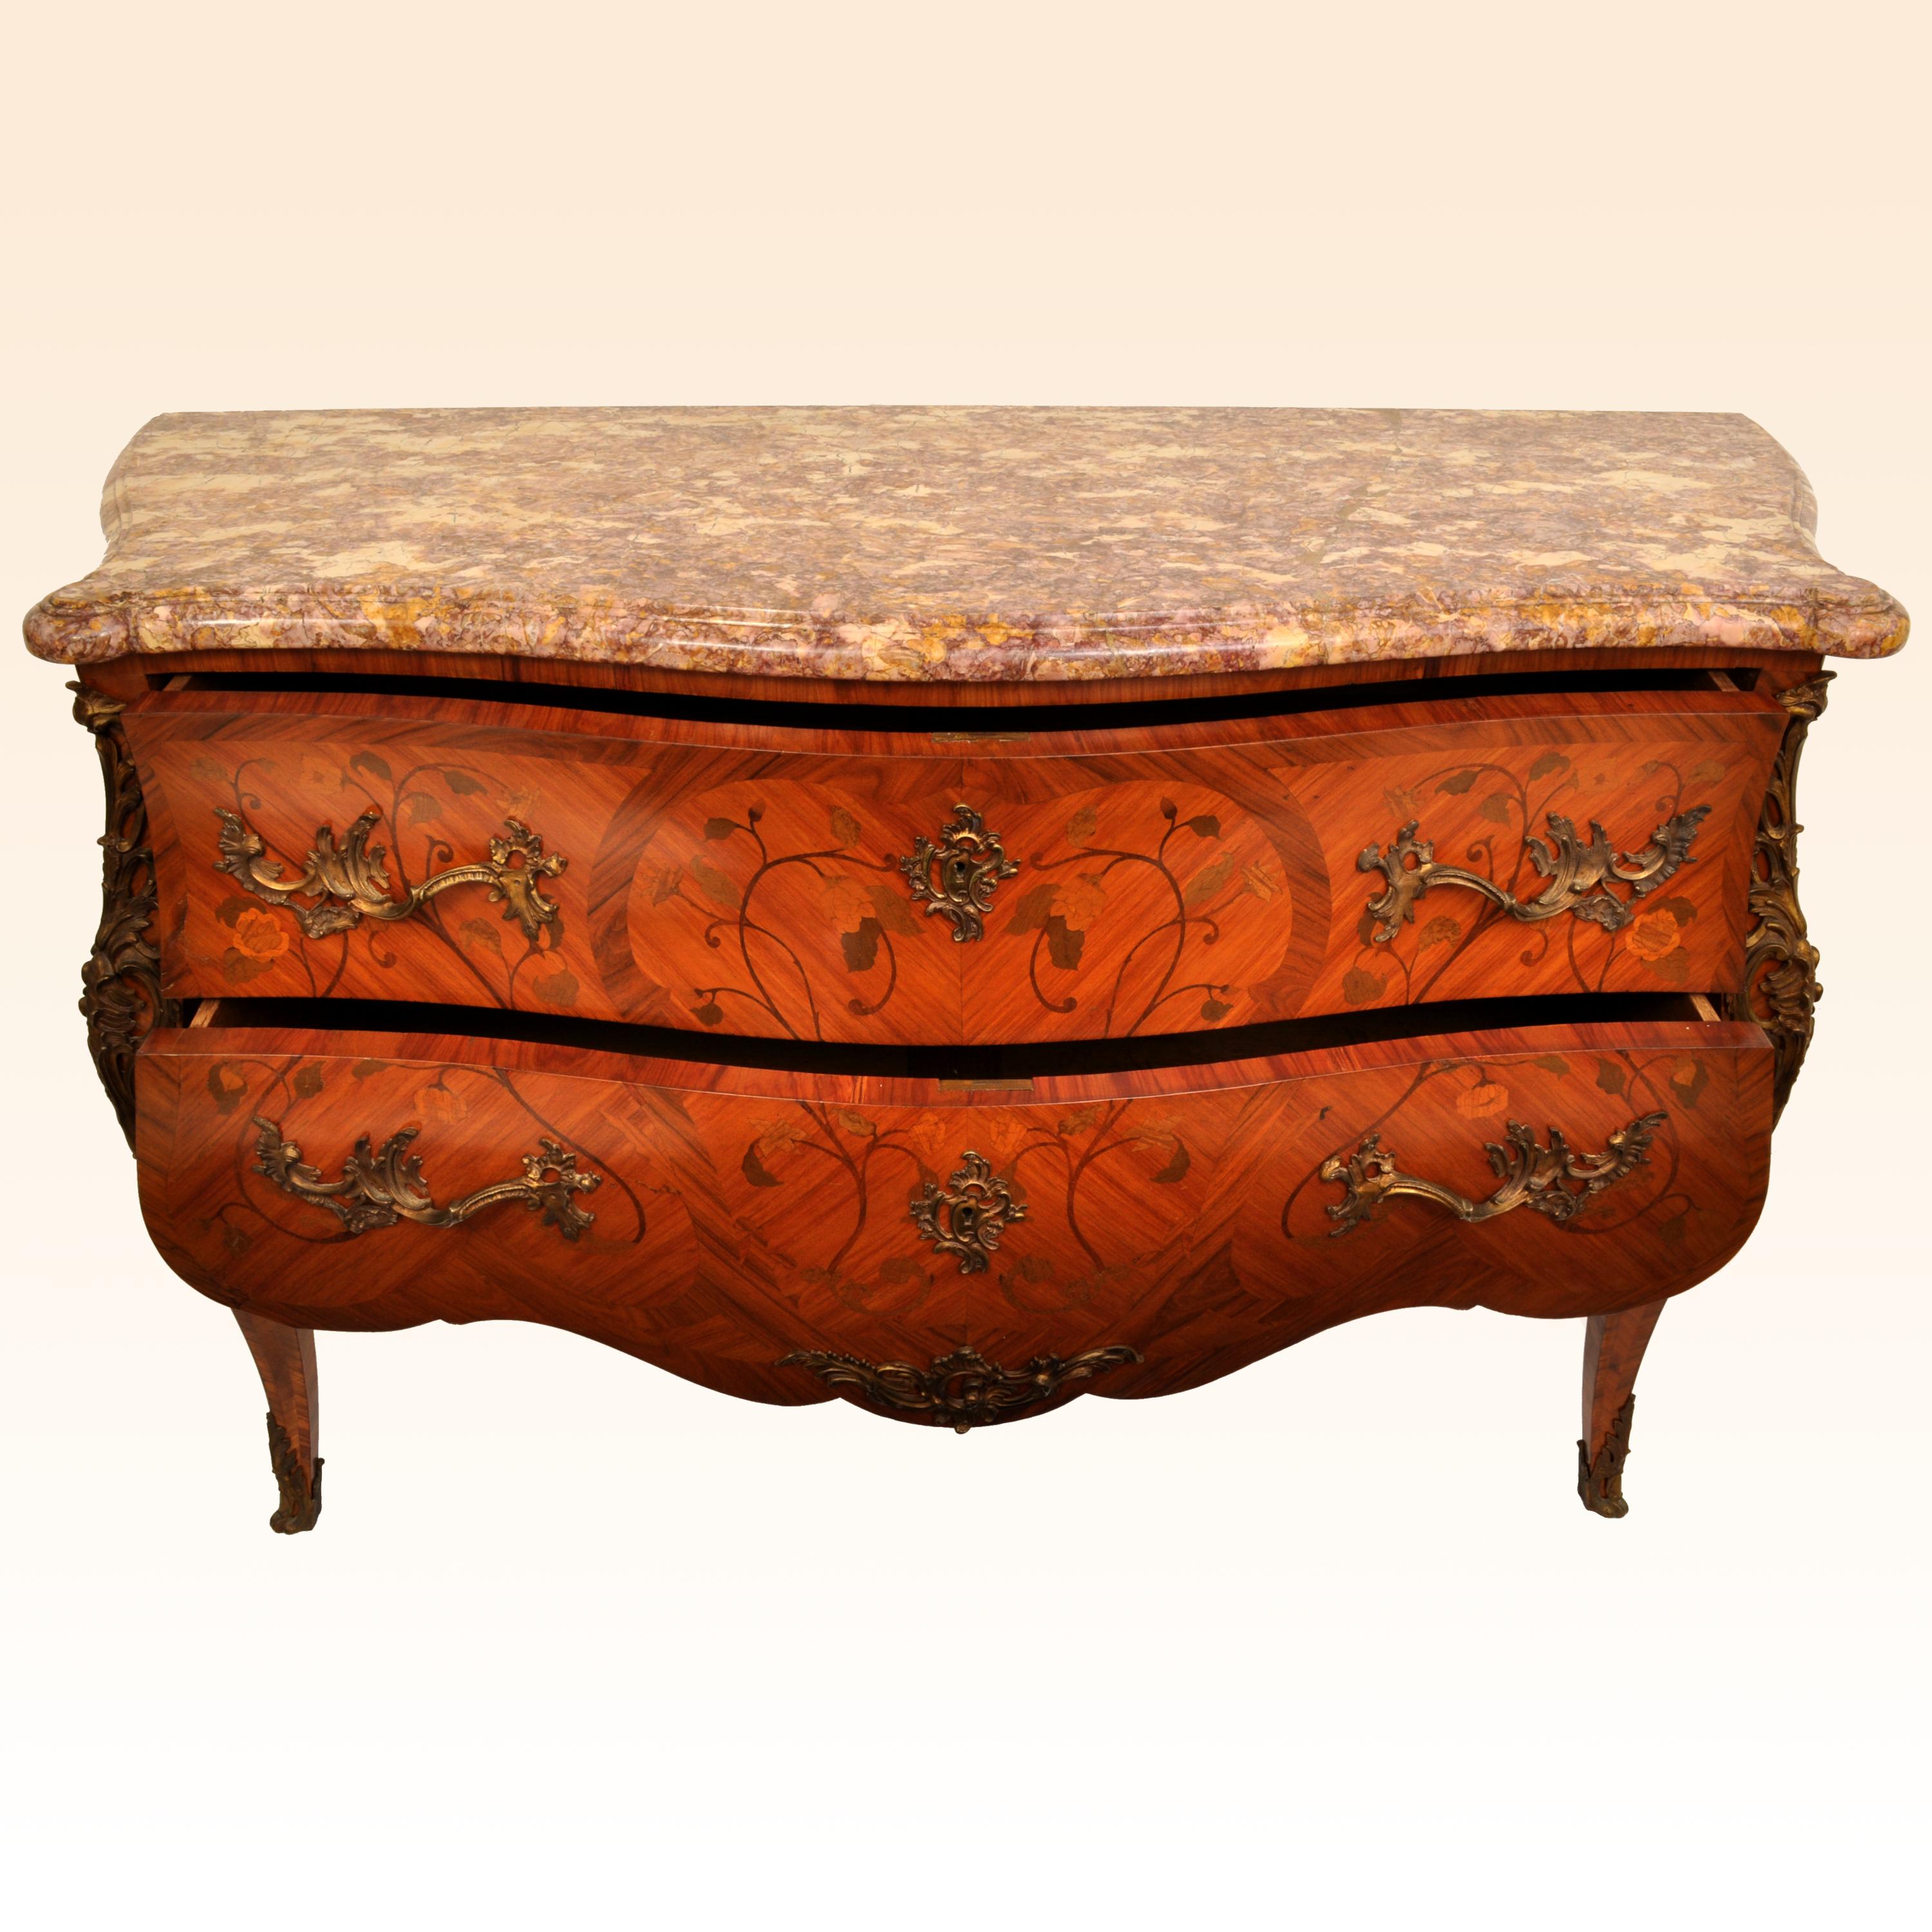 Antique 19th Century French Louis XV Inlaid Marquetry Bombe Commode Chest 1880 1